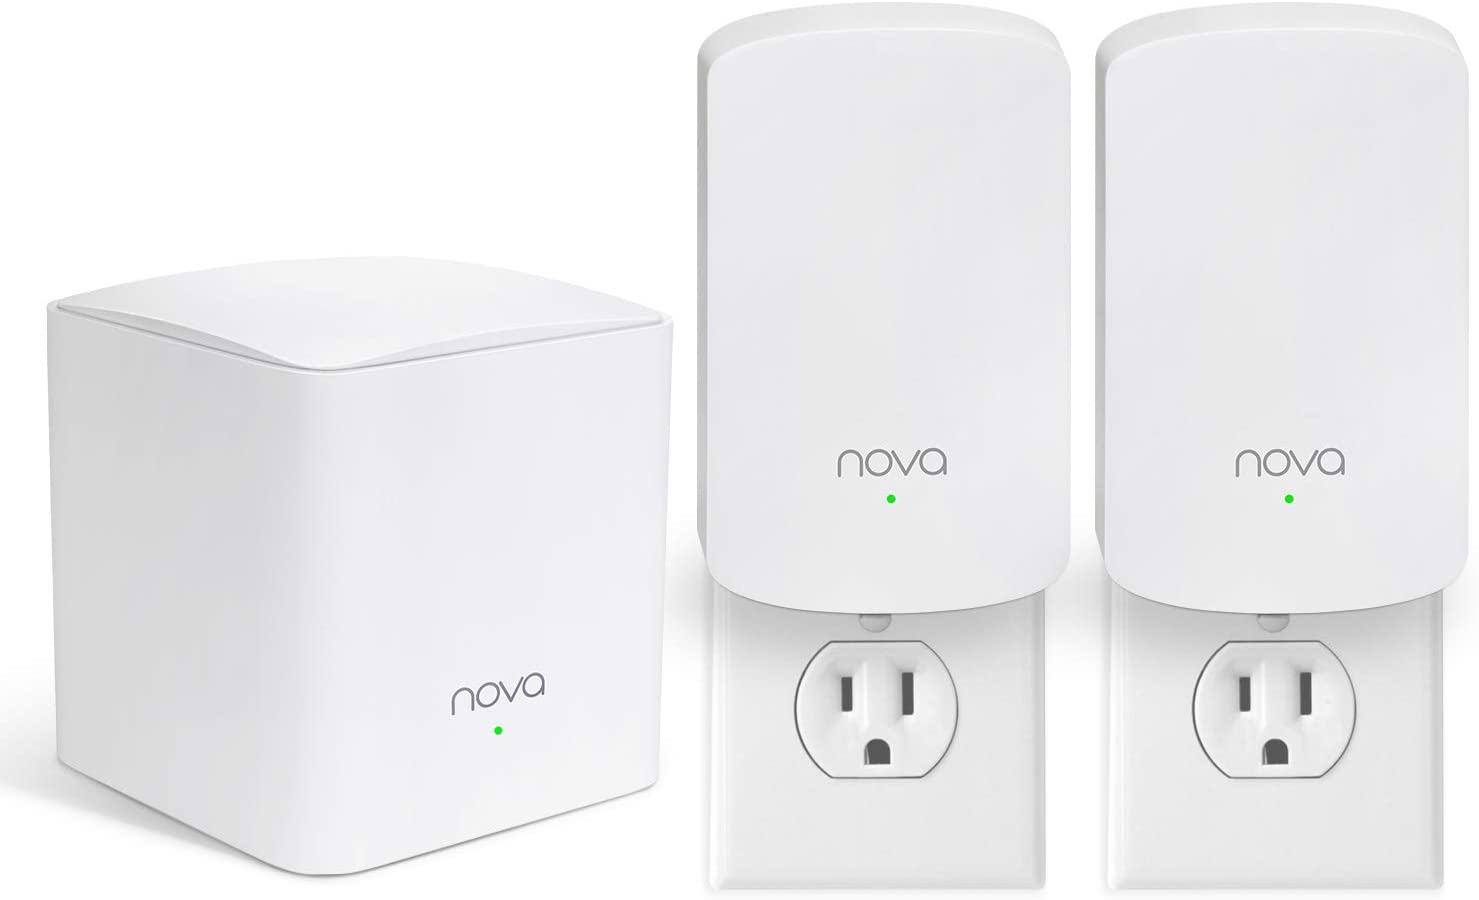 Tenda Nova Mesh WiFi System (MW5)-Up to 3500 sq.ft. Whole Home Coverage, Gigabit Mesh Router for Wireless Internet, WiFi Router and Extender Replacement, Works with Alexa, Plug-in Design, 3-pack